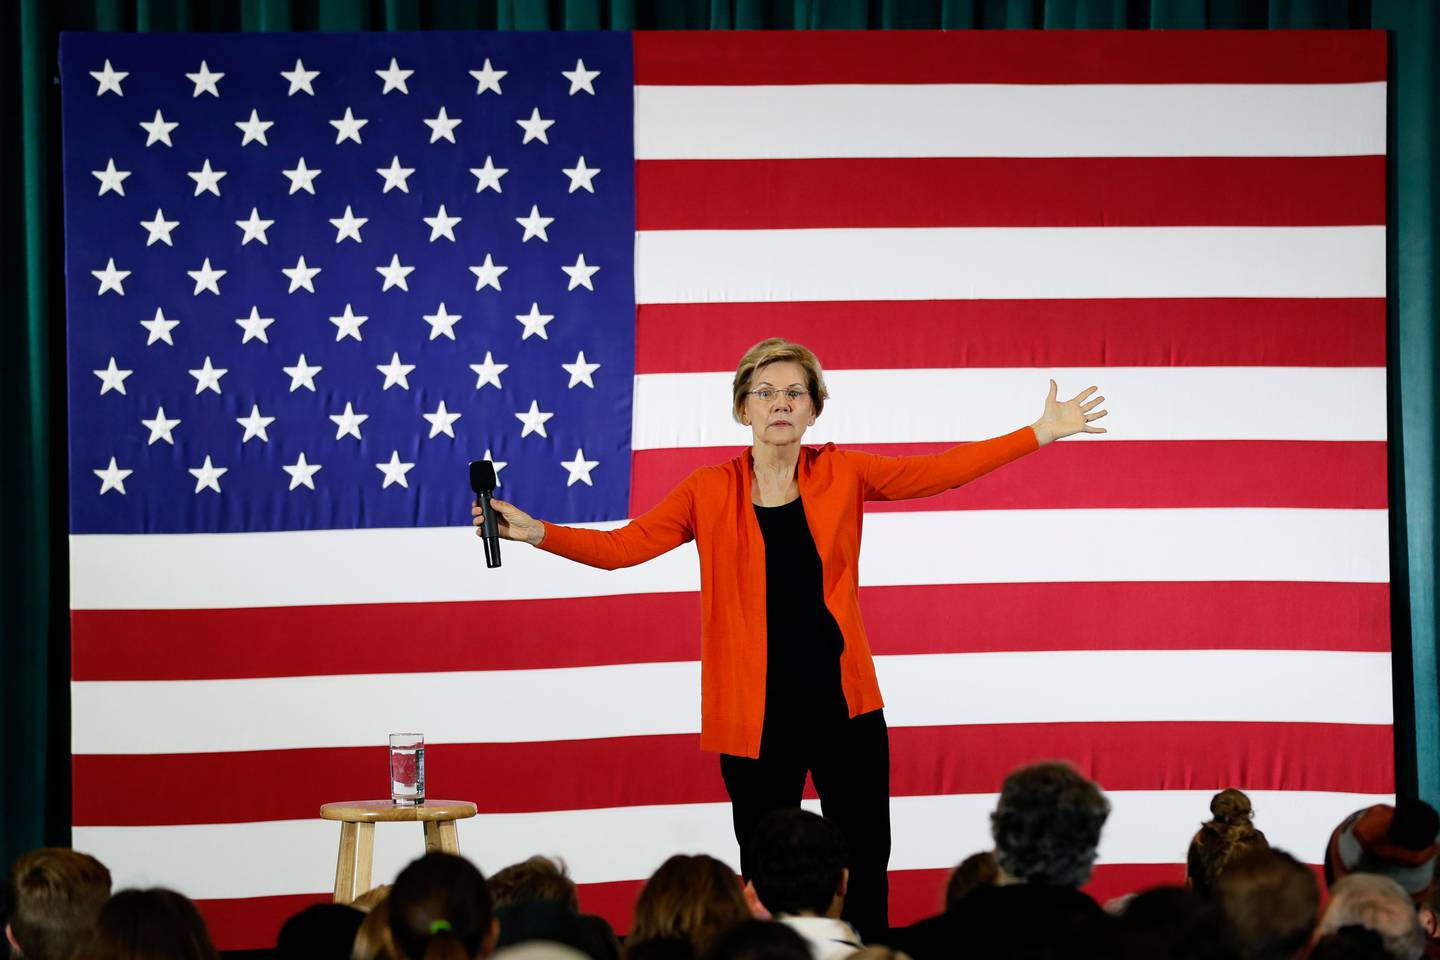 Democratic presidential candidate Sen. Elizabeth Warren speaks during a town hall meeting at Grinnell College, Monday, Nov. 4, 2019, in Grinnell, Iowa. (AP Photo/Charlie Neibergall)